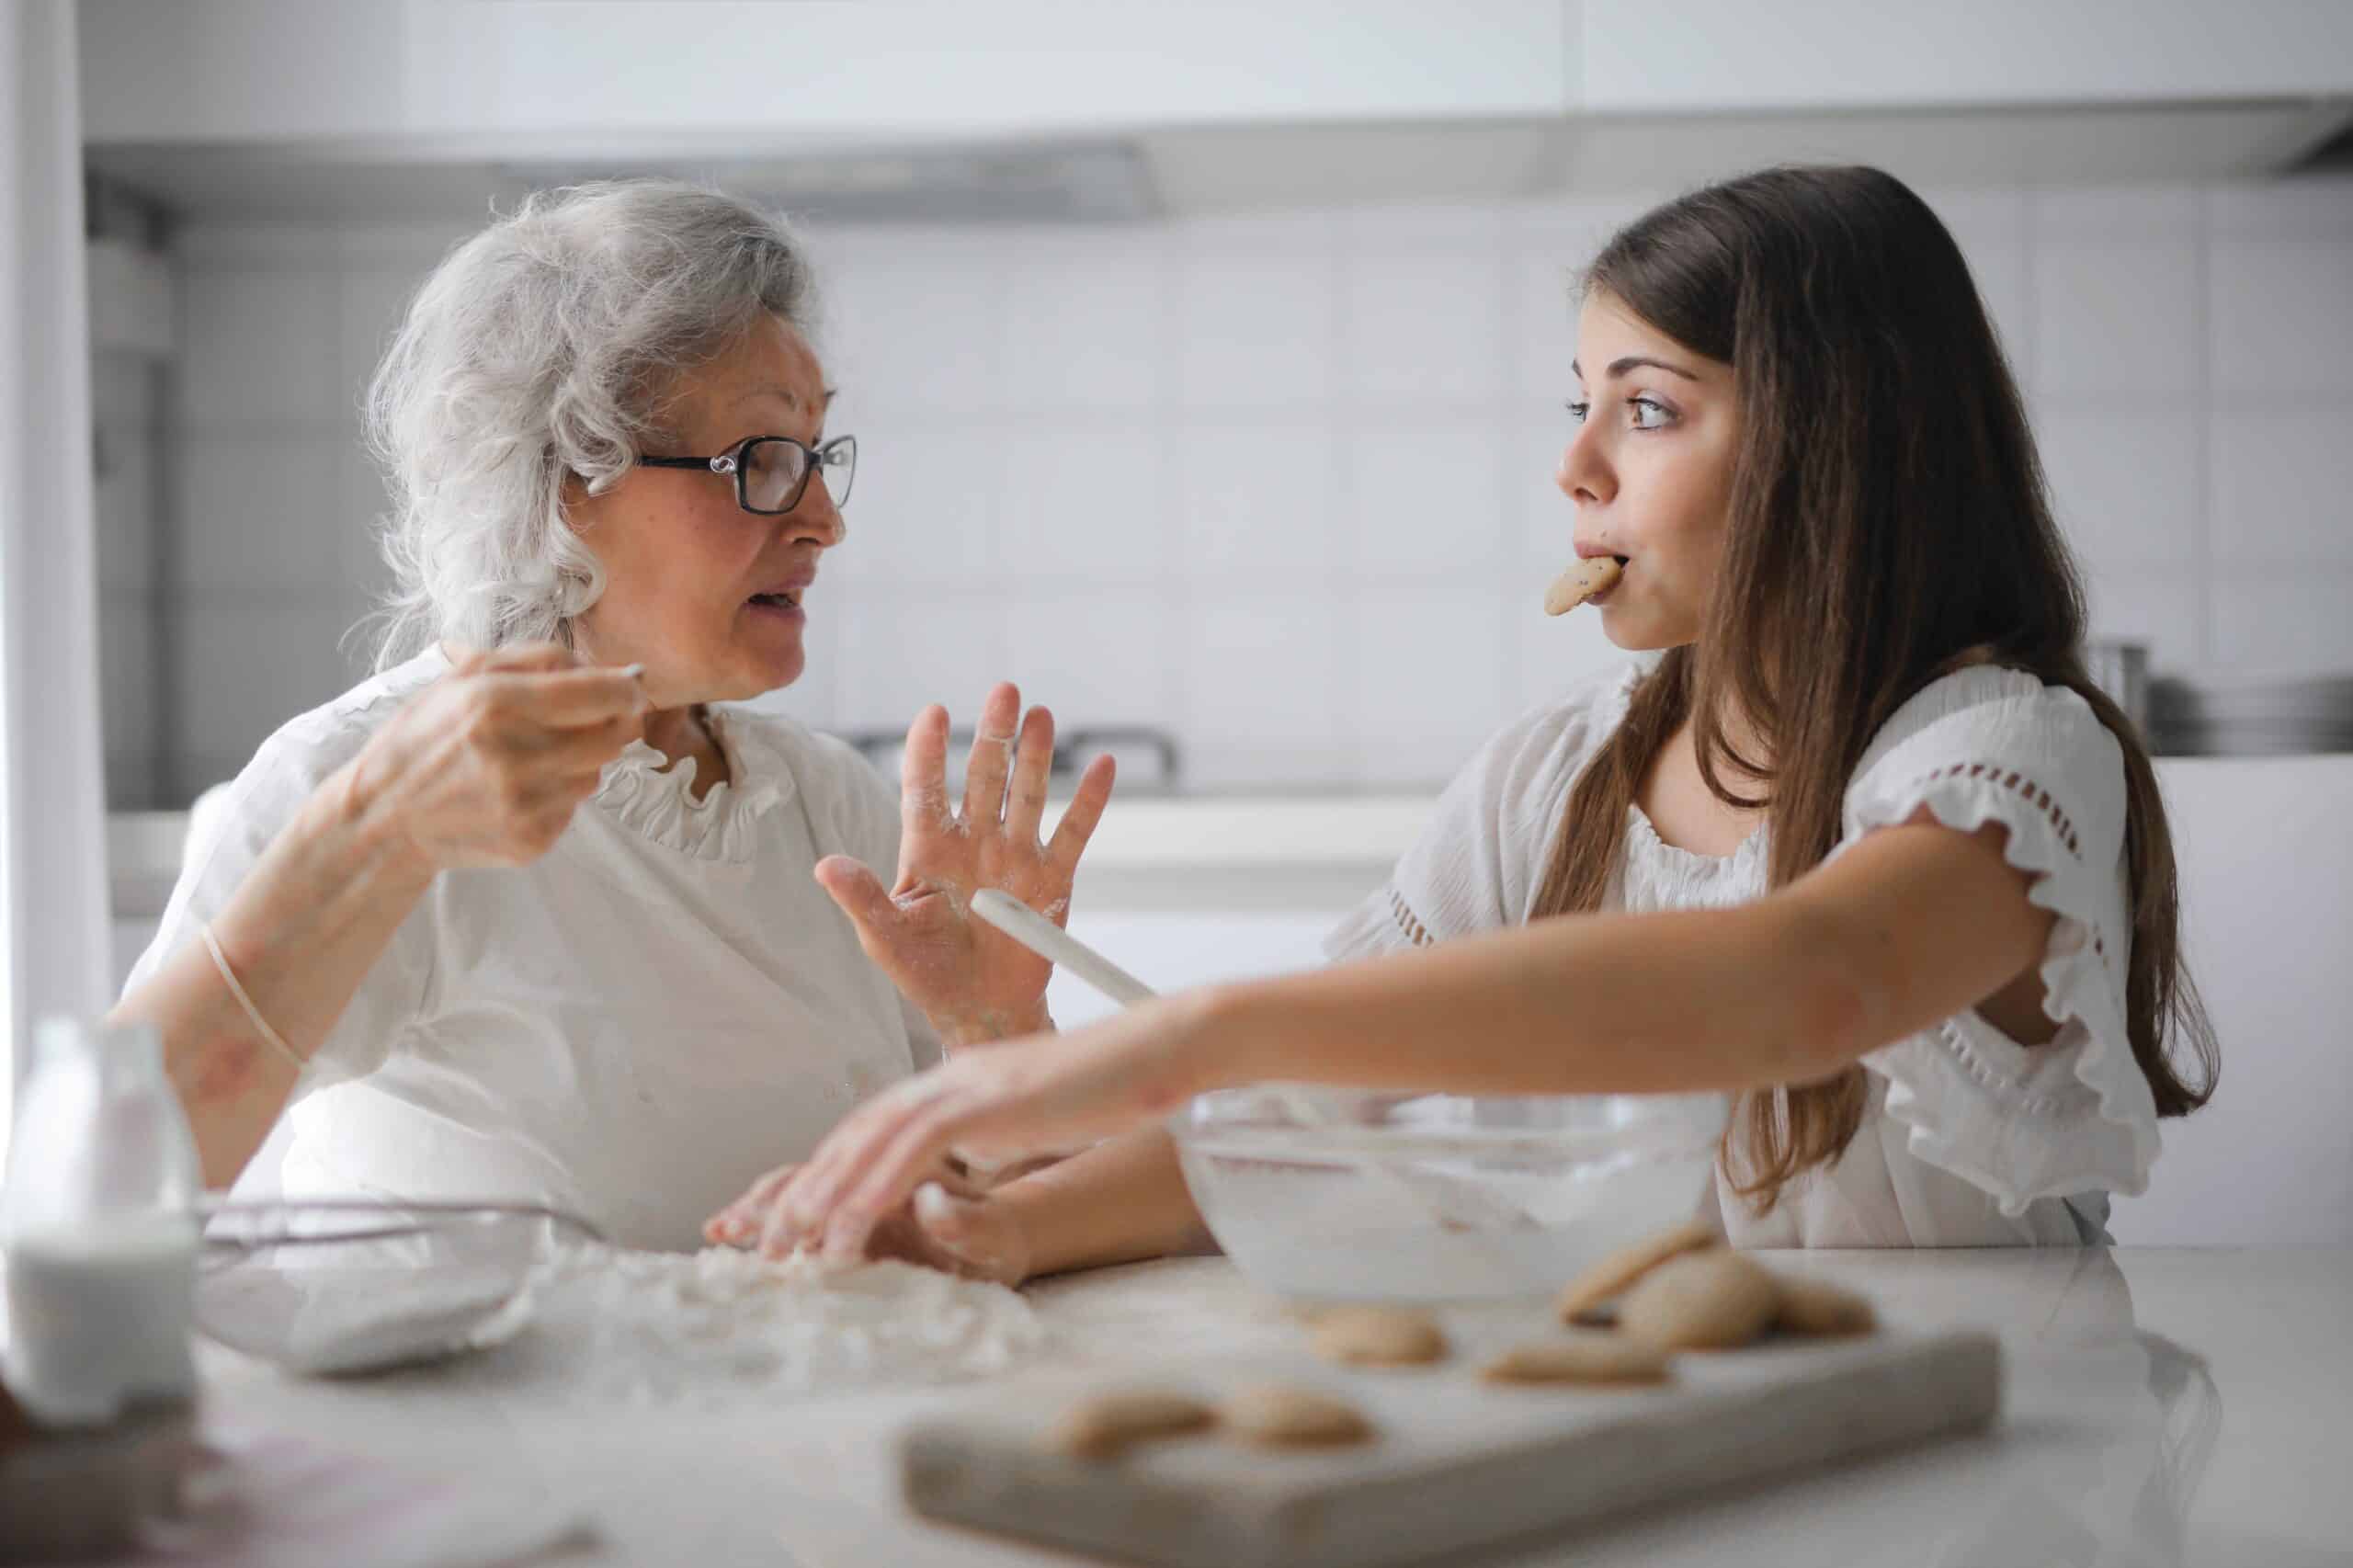 Mother and daughter baking cookies together.